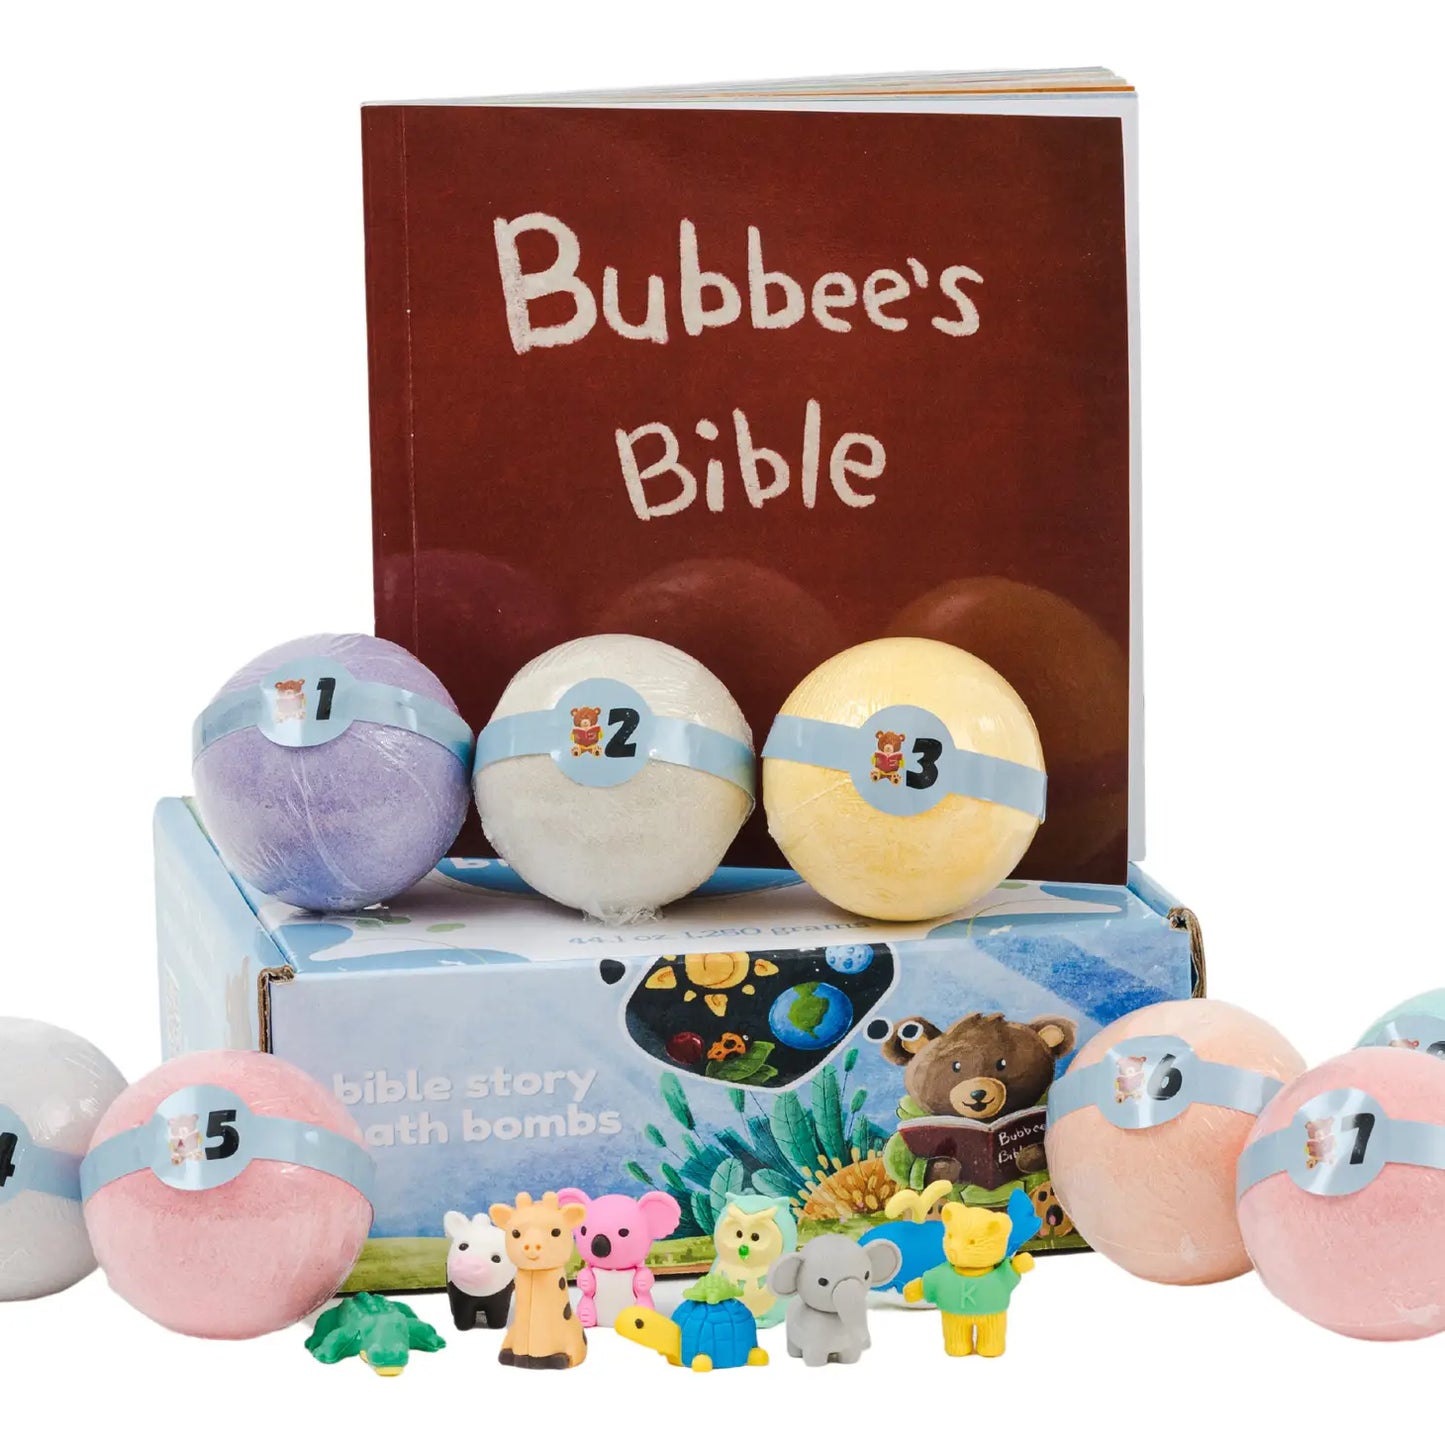 Bubbee's Bible - Bath Bombs with a Biblical story!